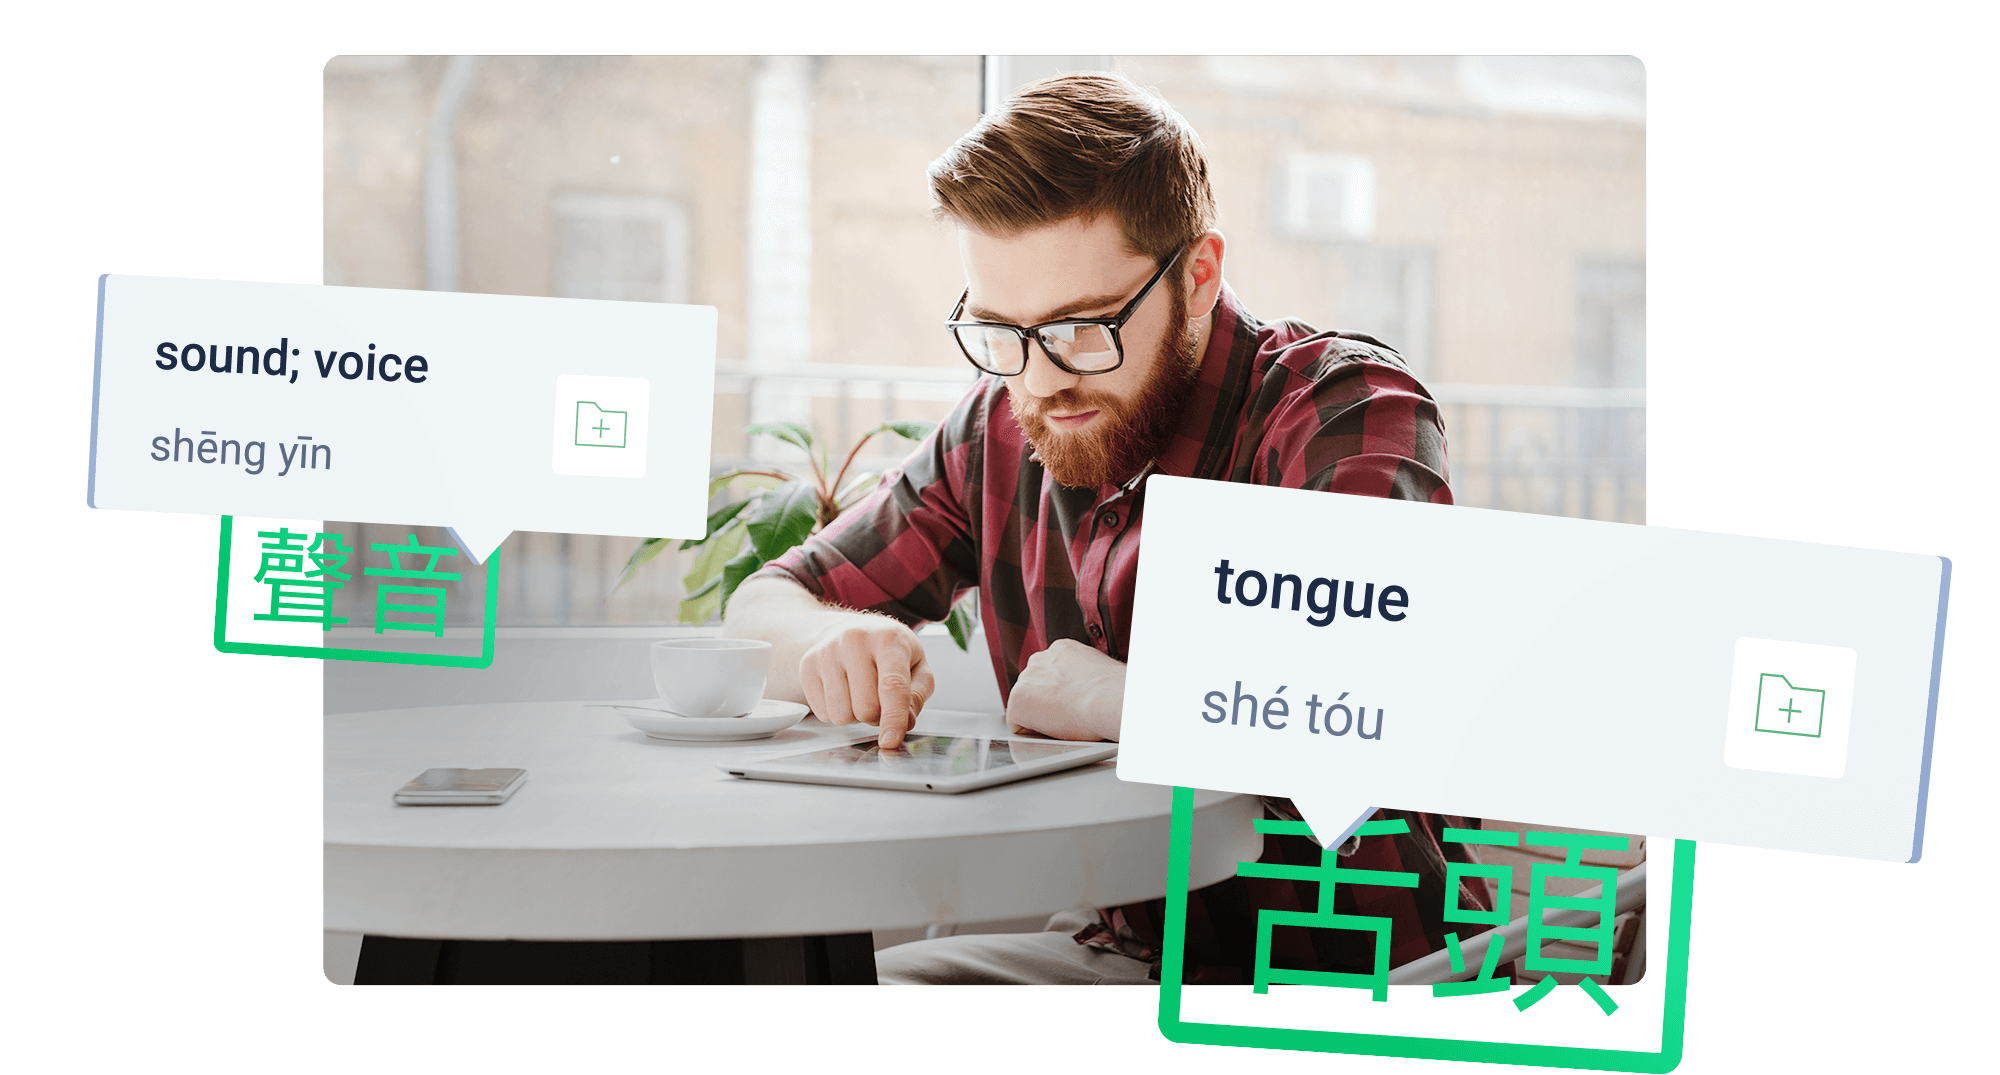 Get fluent by reading